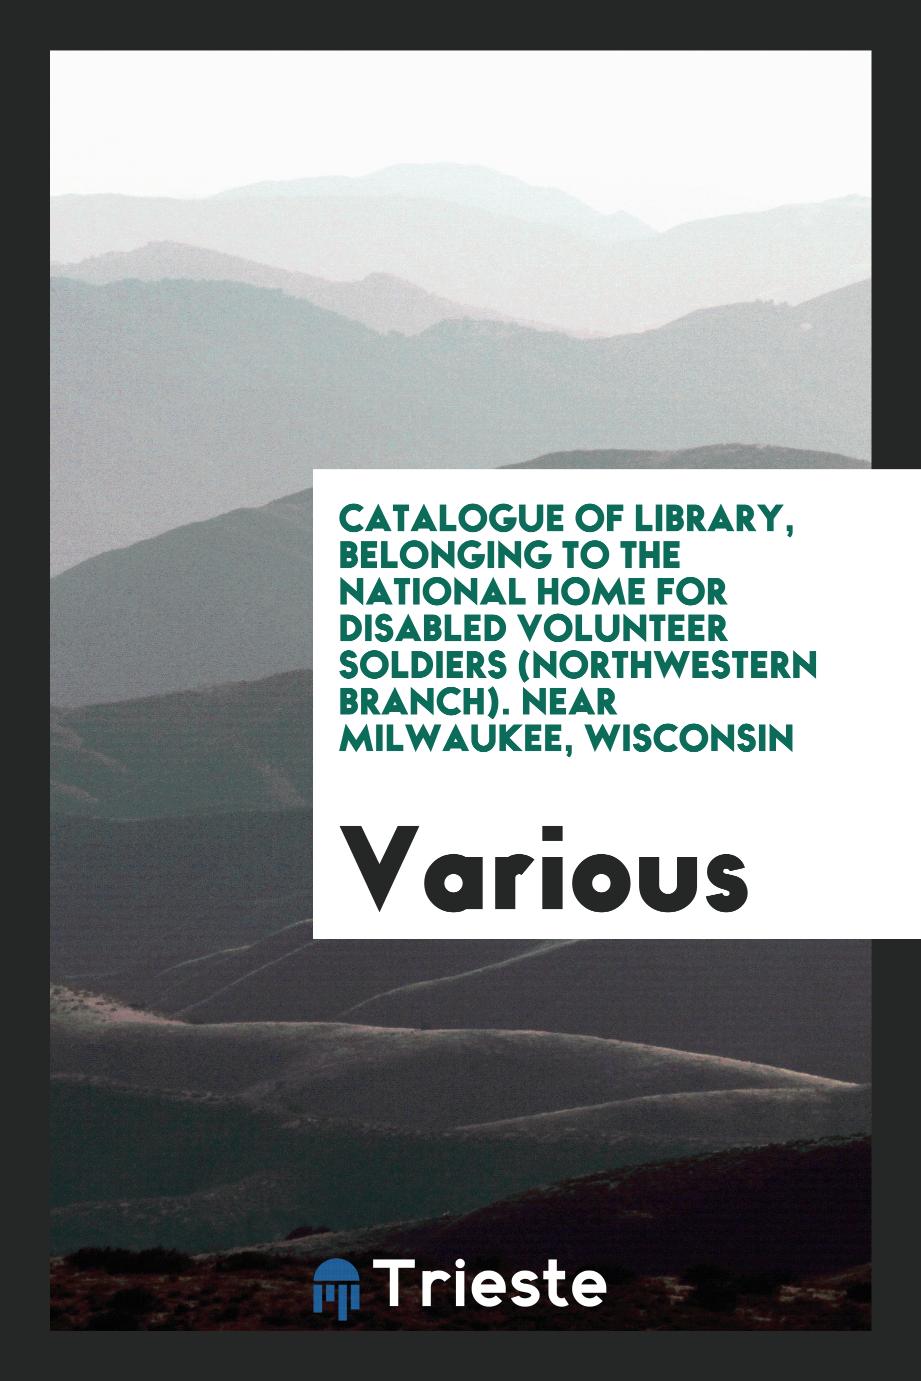 Catalogue of Library, Belonging to the National Home for Disabled Volunteer Soldiers (Northwestern Branch). Near Milwaukee, Wisconsin